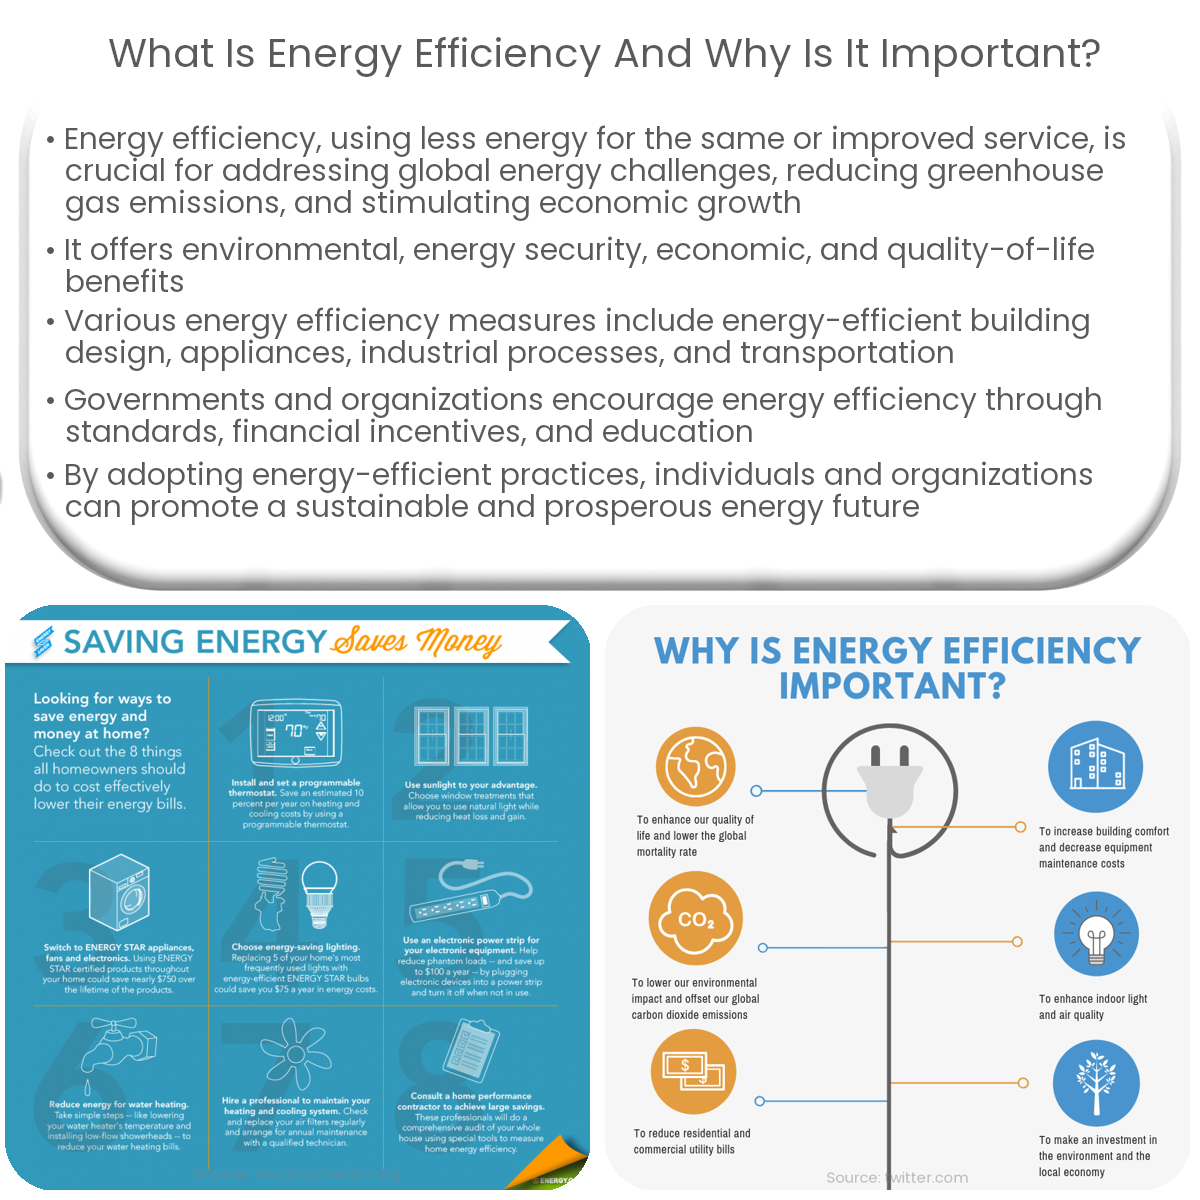 What is energy efficiency and why is it important?